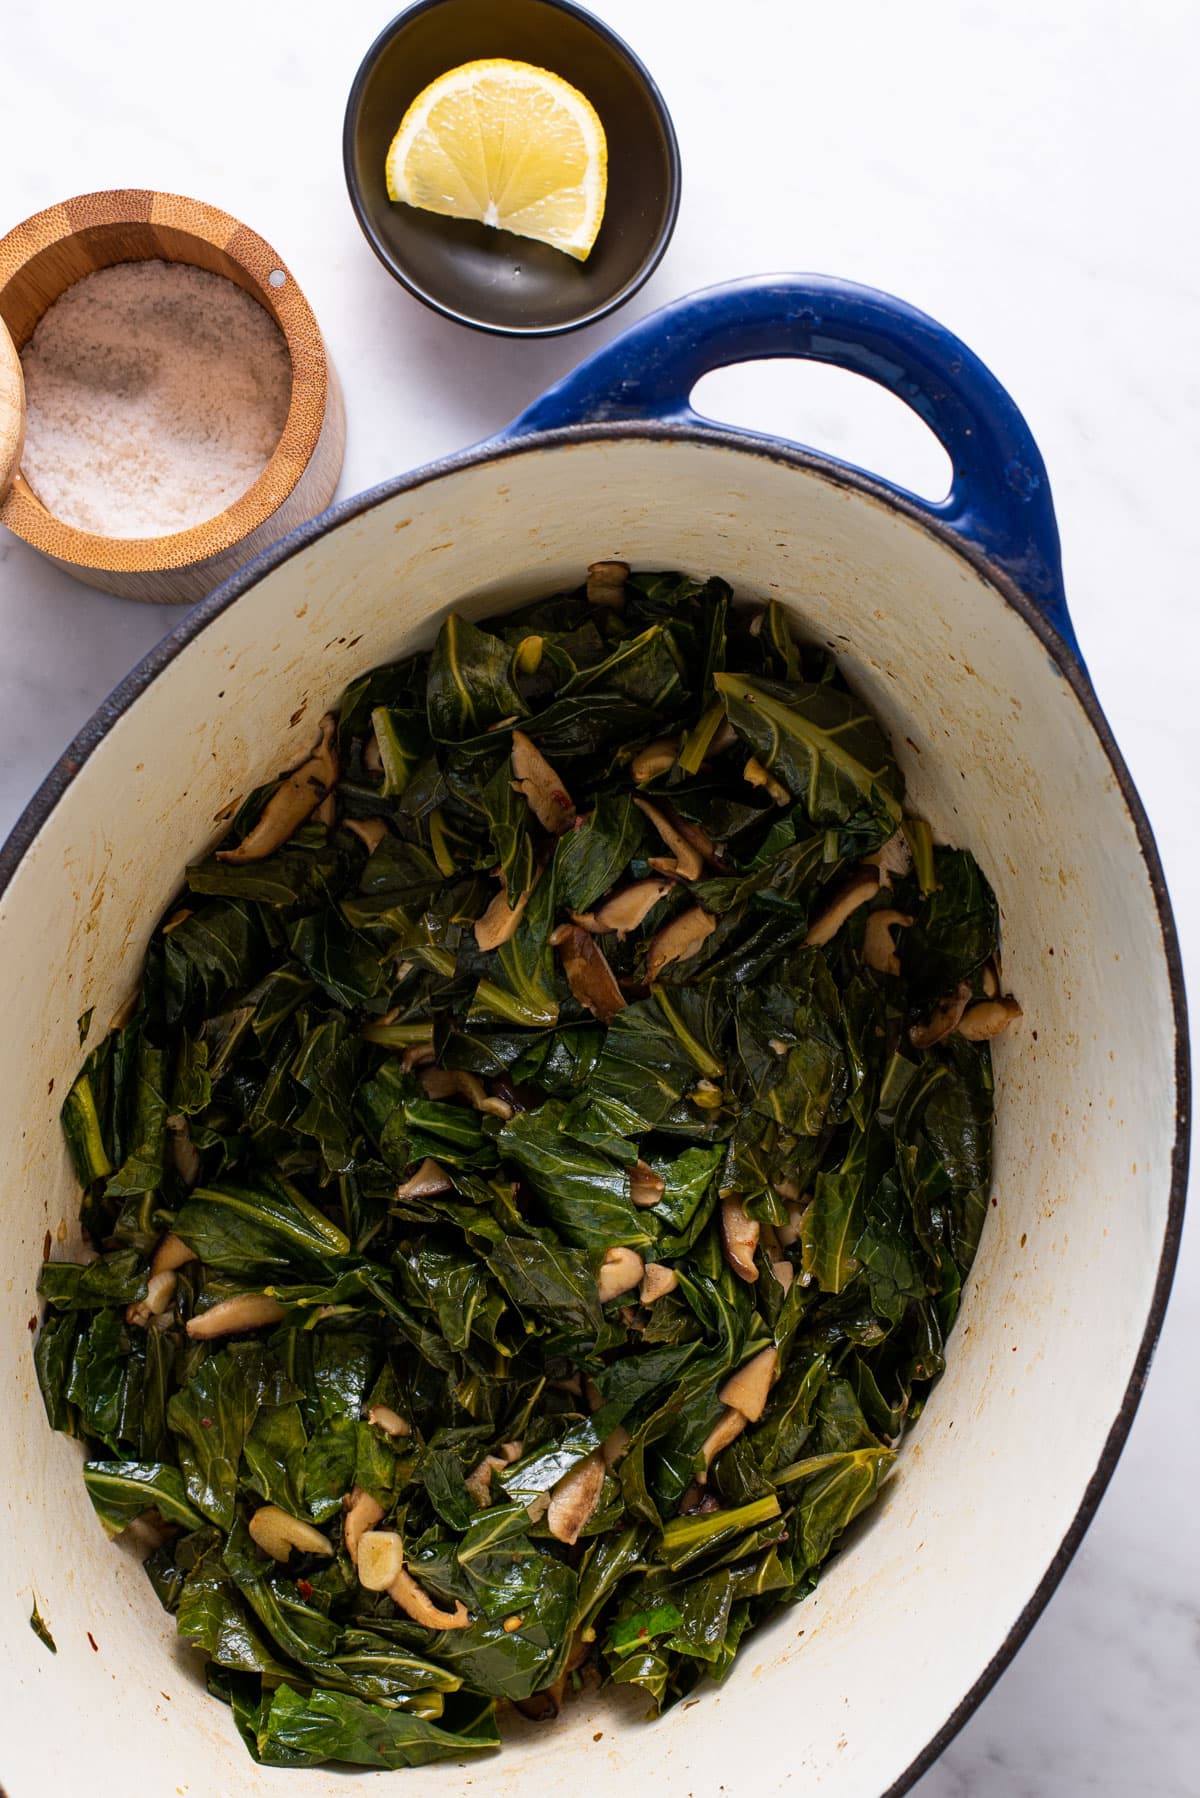 Braised collard greens in a Dutch oven next to lemon and salt.